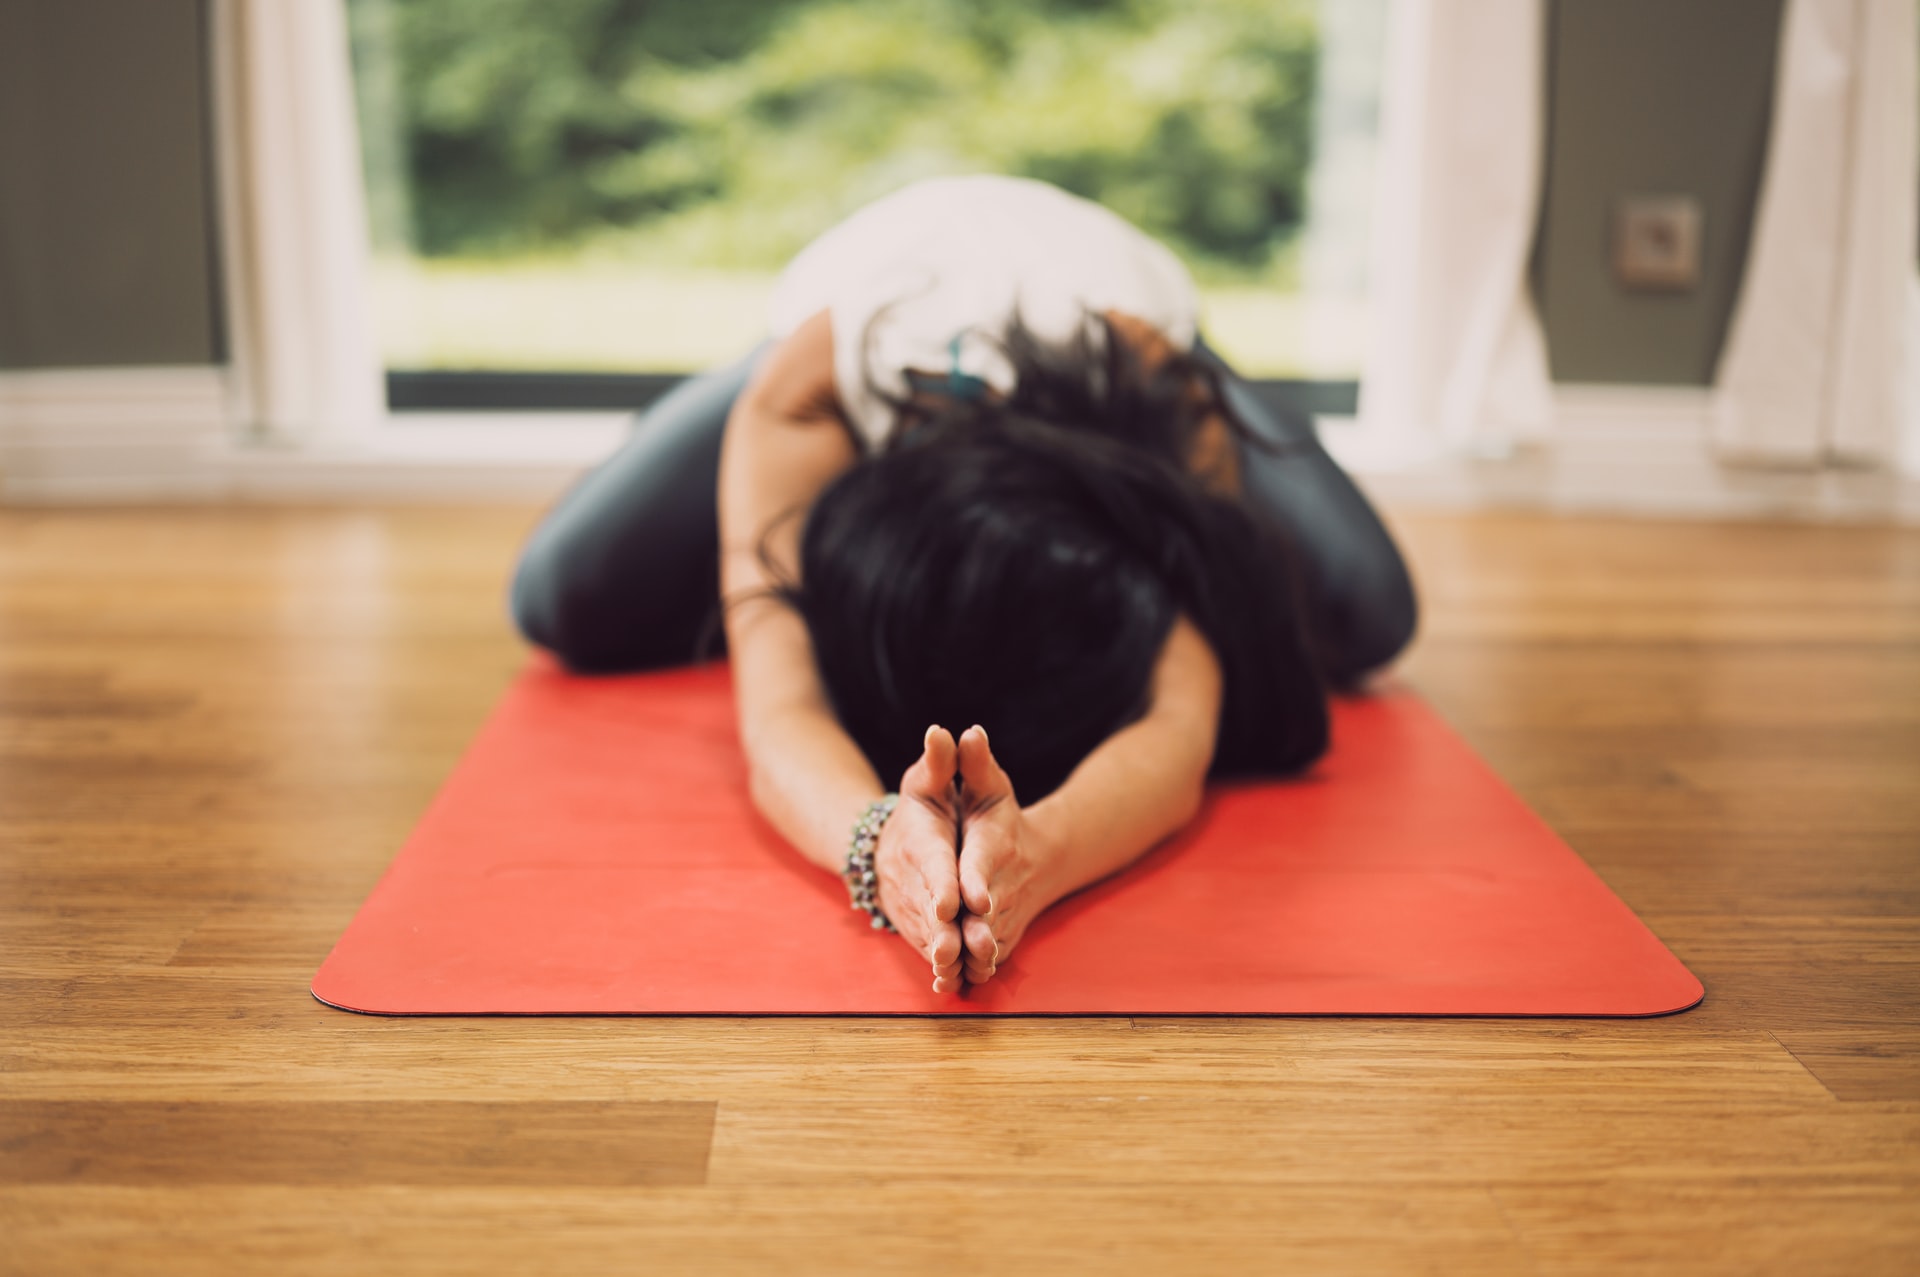 5 stretches you should do every day